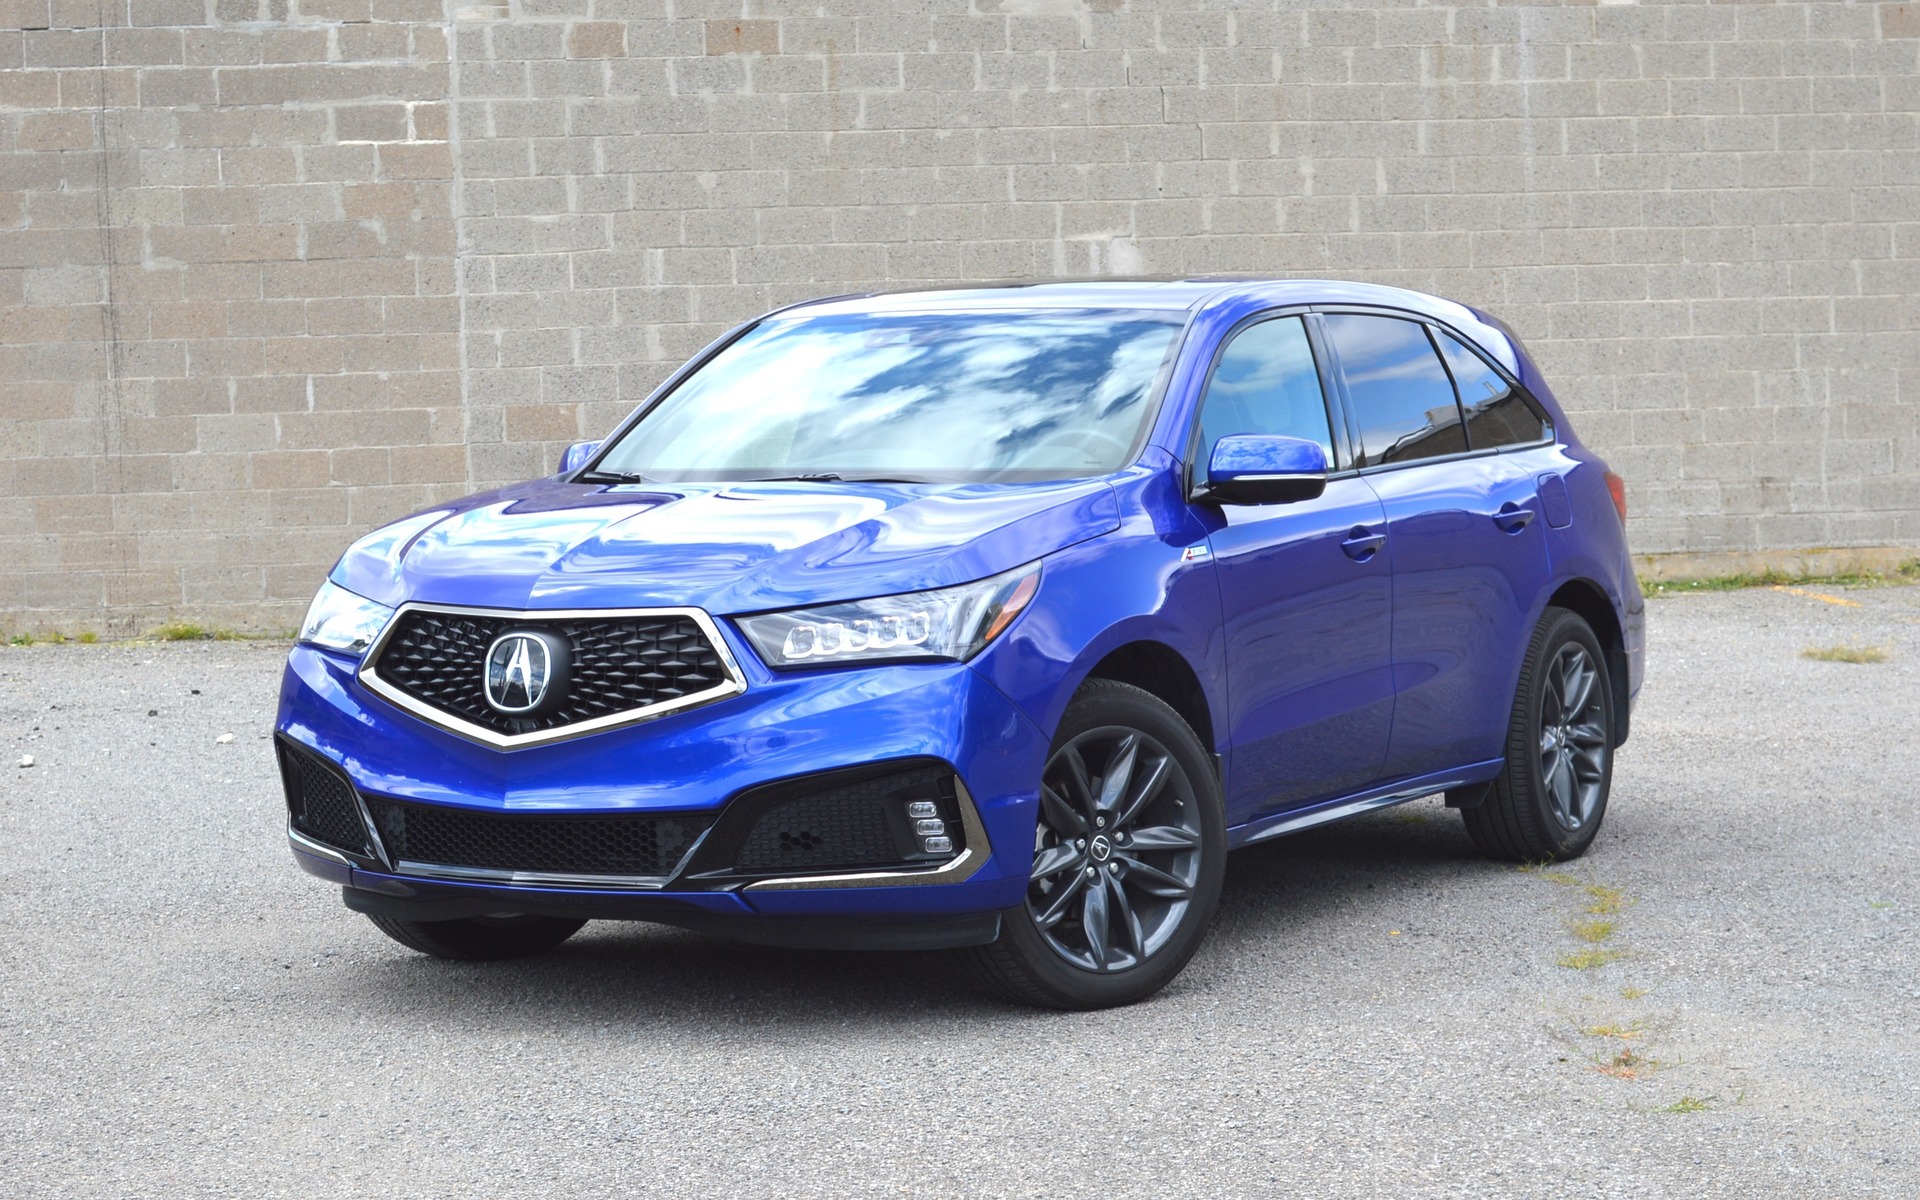 2019 Acura MDX: Not Showing all its Cards - The Car Guide